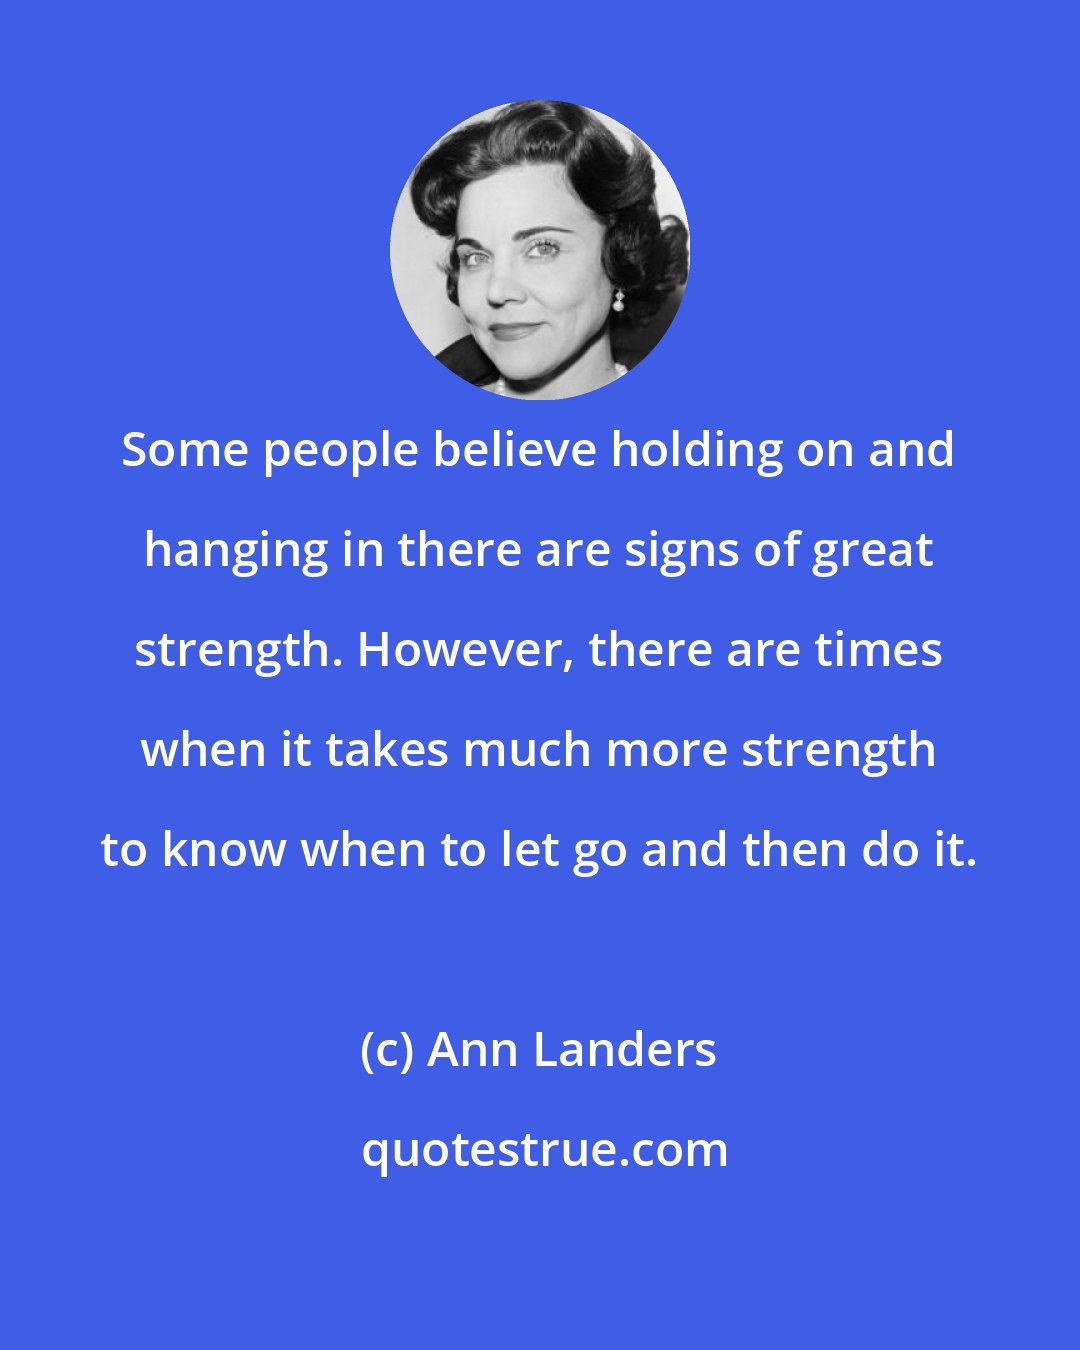 Ann Landers: Some people believe holding on and hanging in there are signs of great strength. However, there are times when it takes much more strength to know when to let go and then do it.